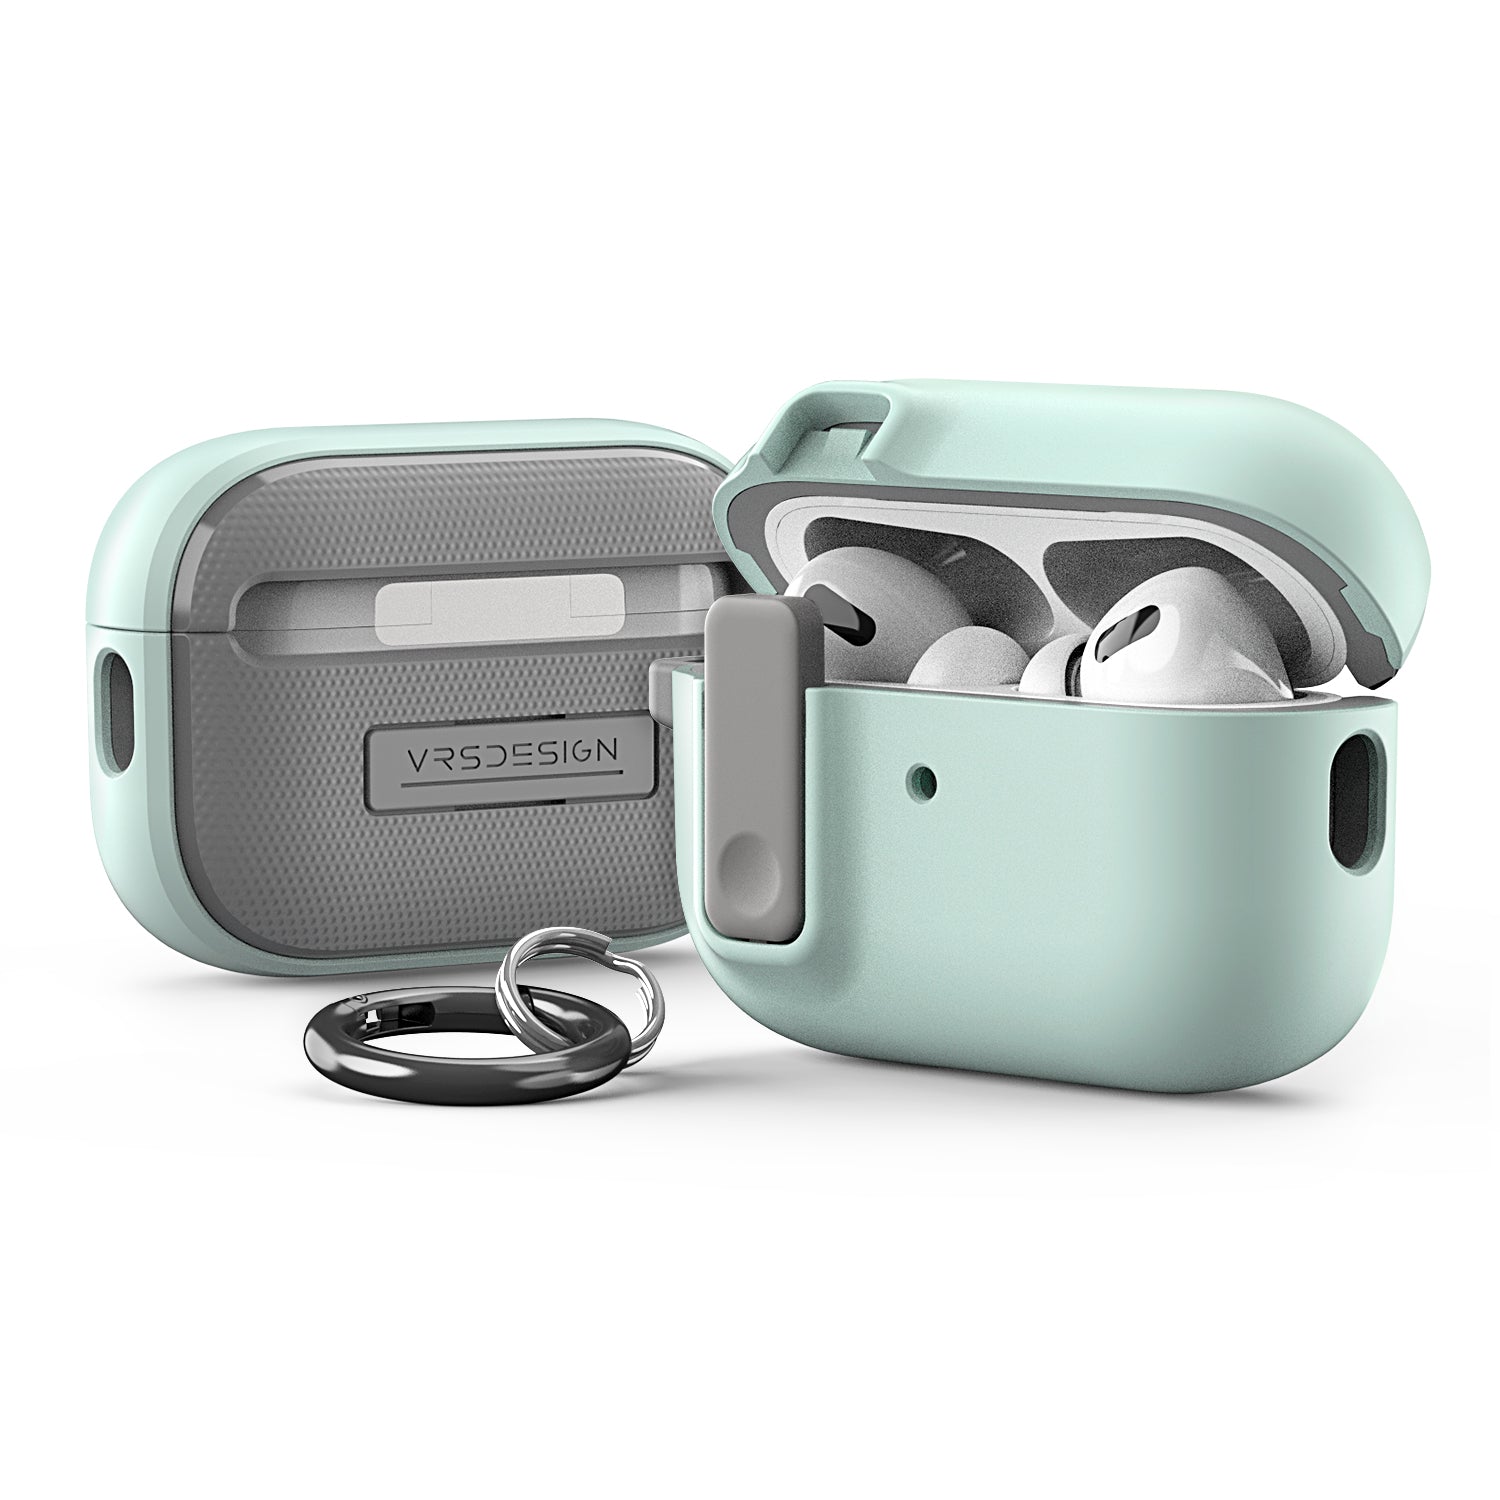 elago Silicone Case with Keychain Designed for Apple AirPods Case [Pastel Green]